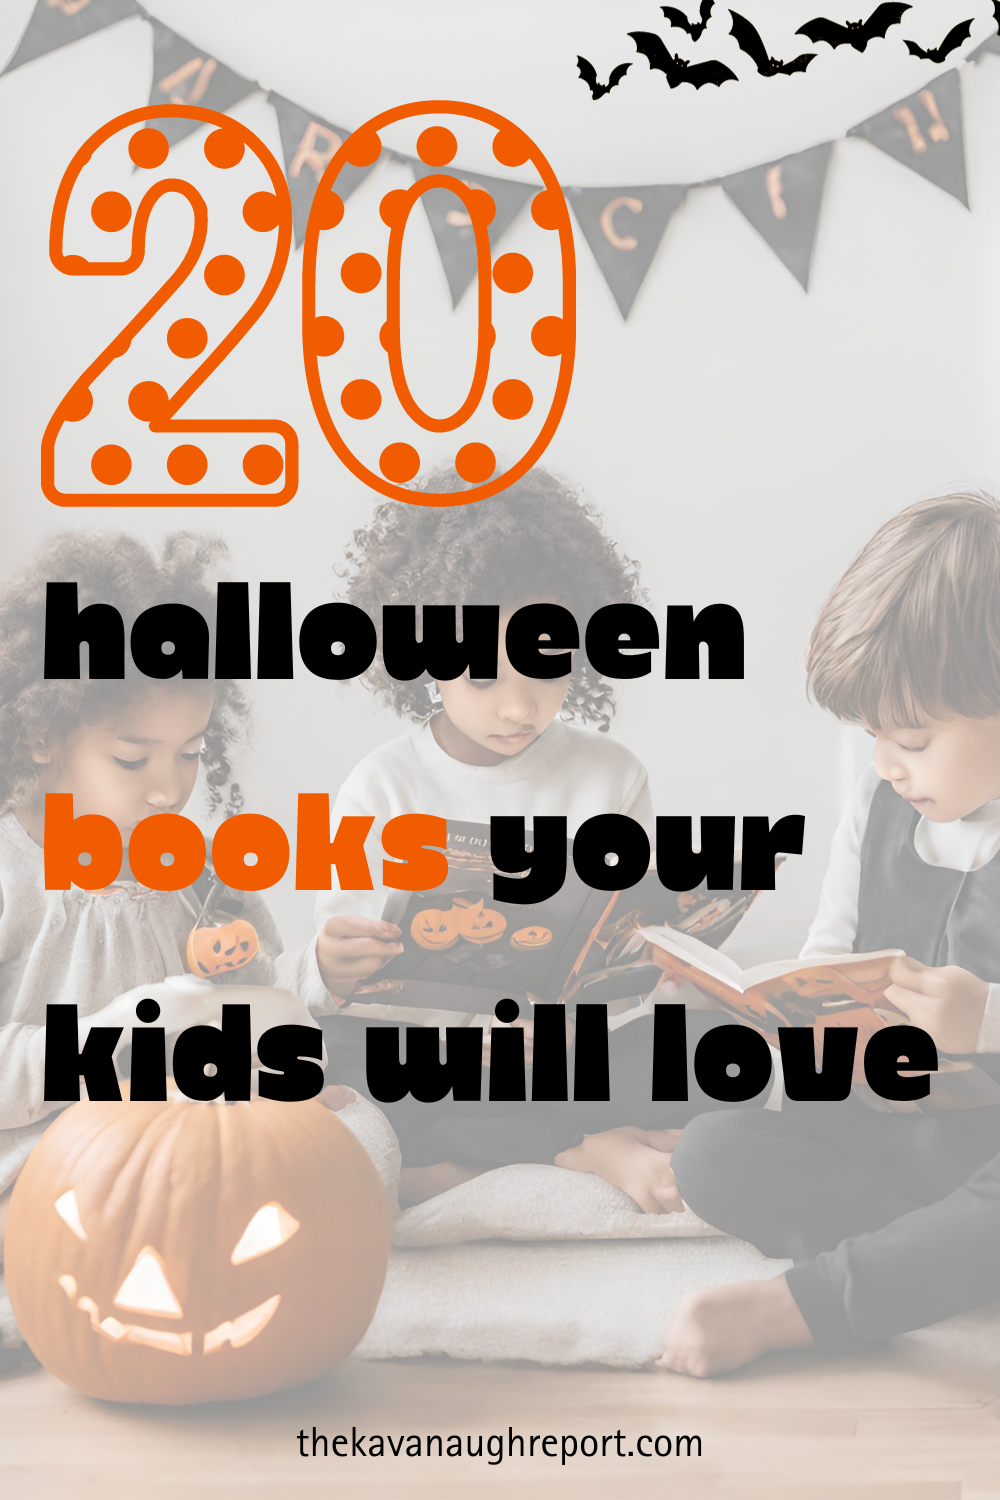 Looking for a fun way to celebrate Halloween? Why not try a themed book?! Here are 20 children's books we use in our Montessori home to celebrate Halloween in a fun and connecting way.